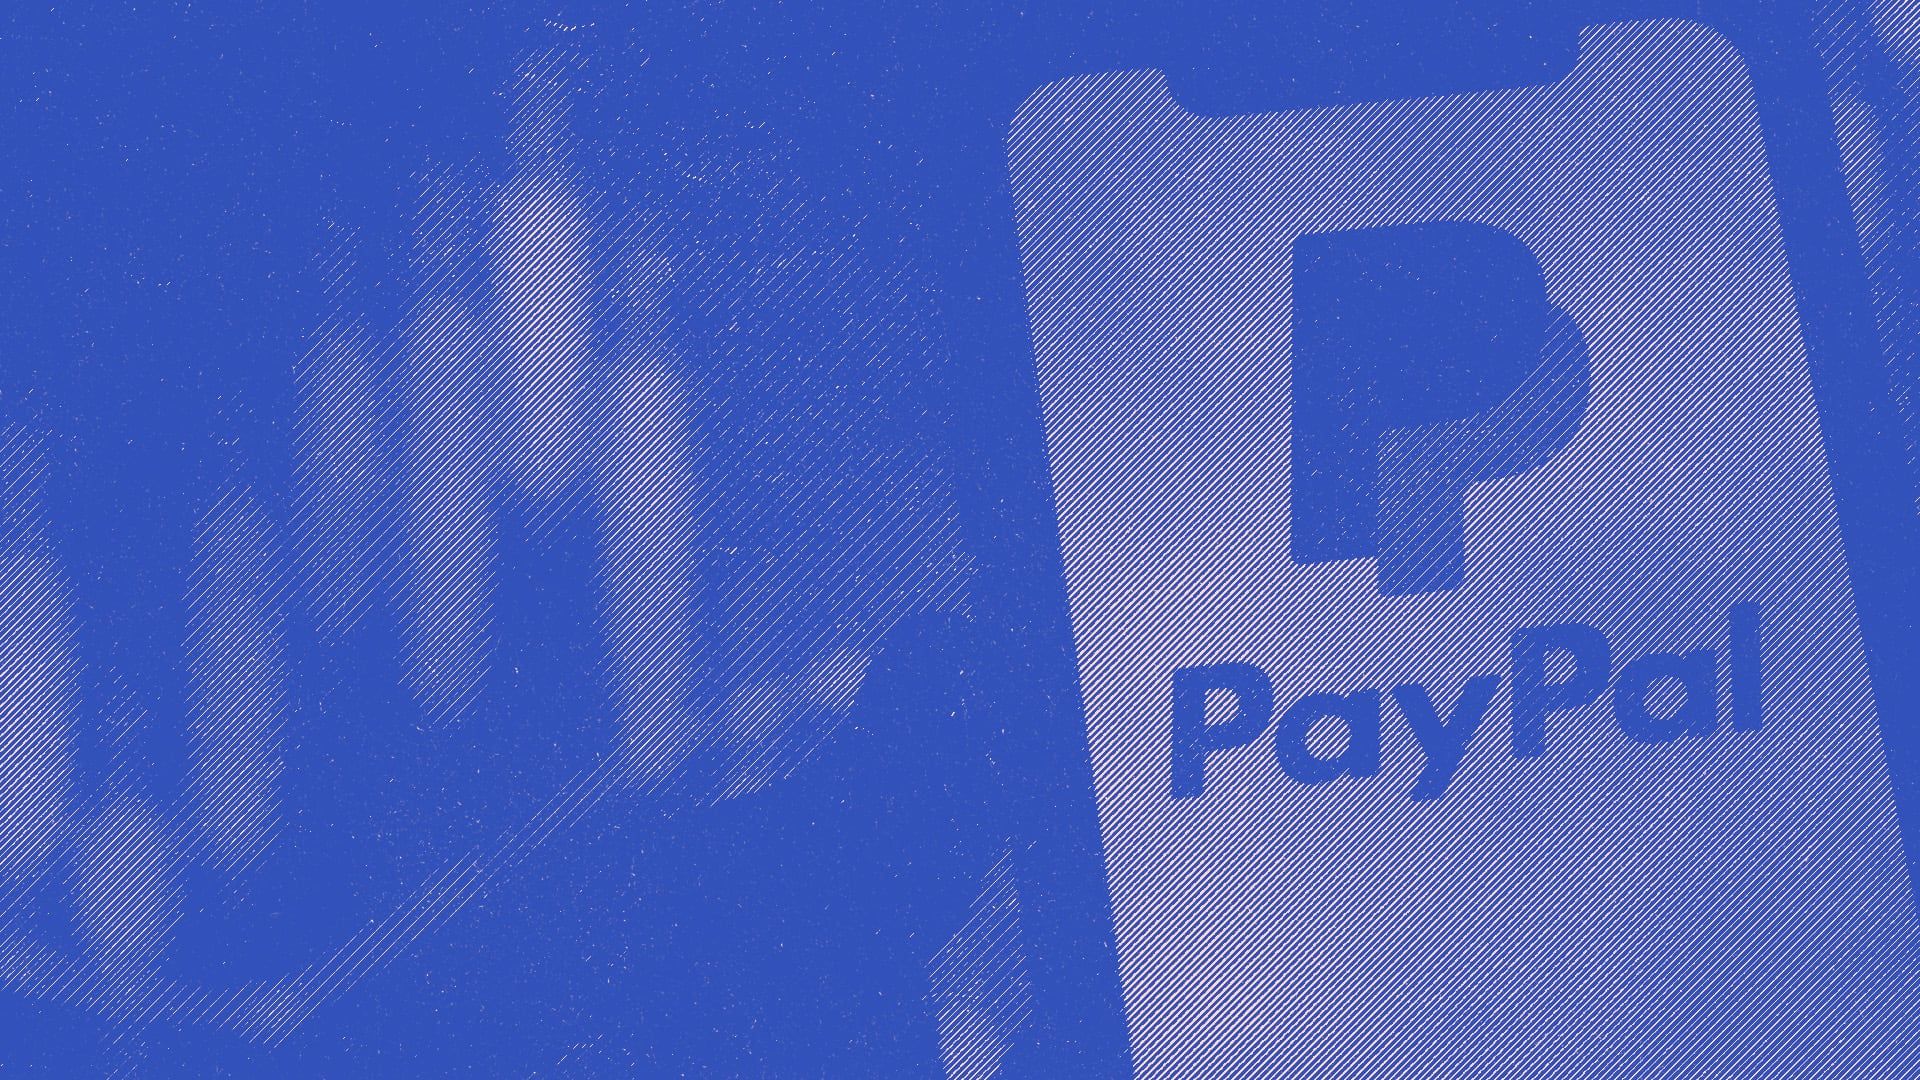 Onchain: PayPal enters the stablecoin game, Base goes live and buy your friends